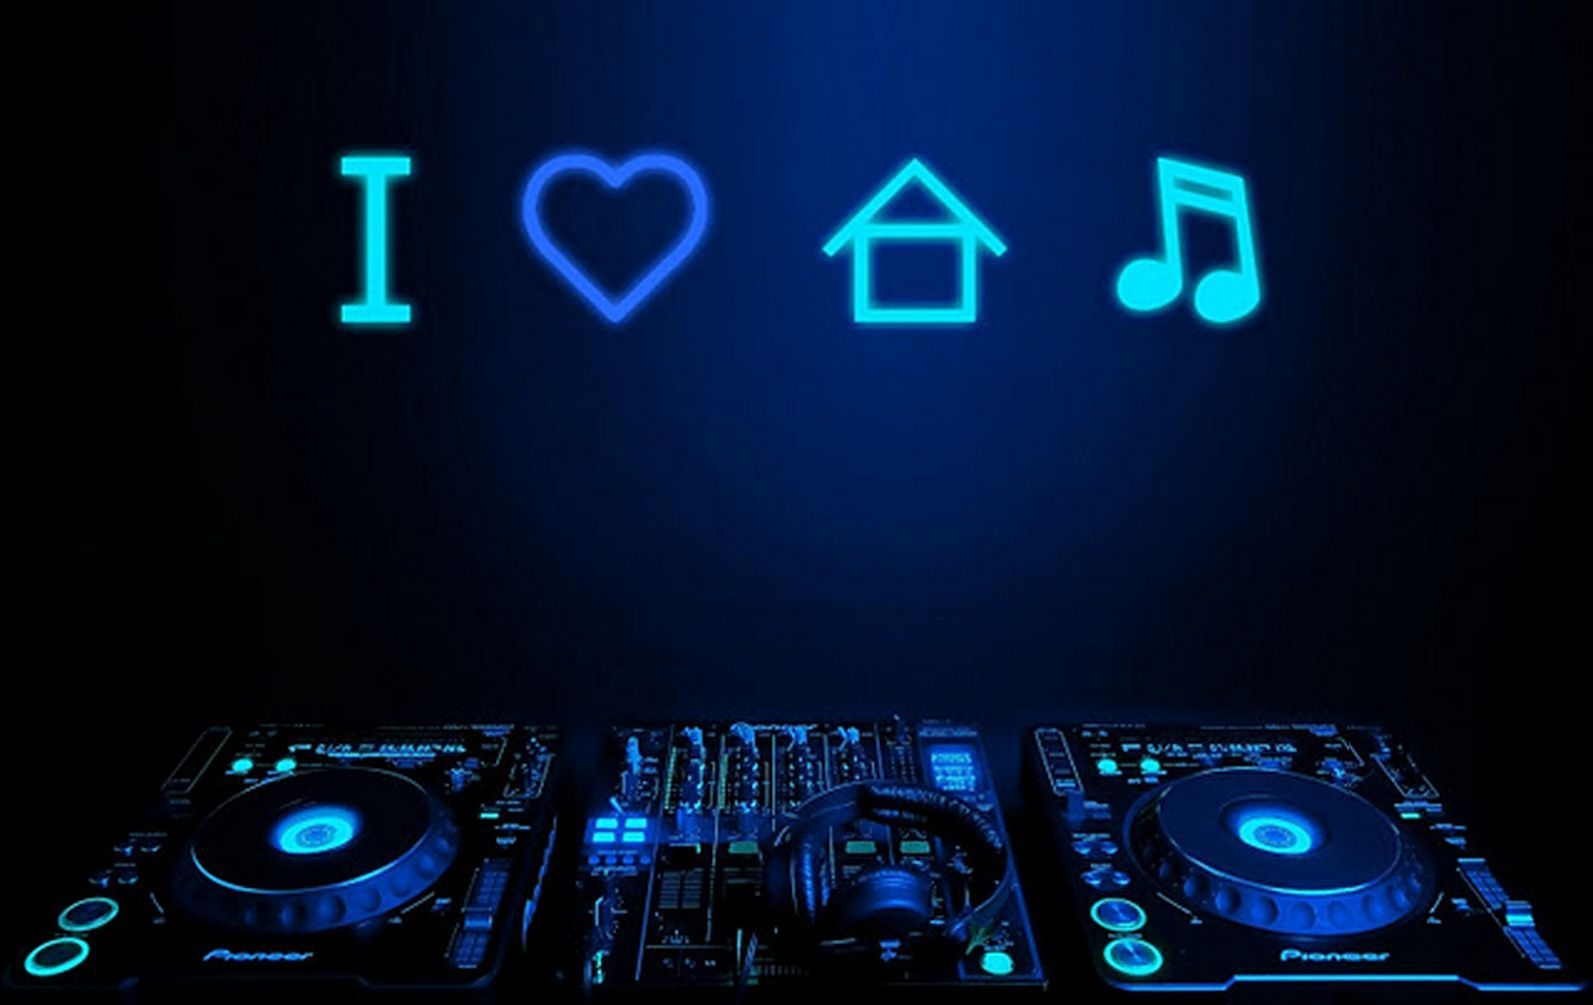 House Music Wallpaper Free House Music Background